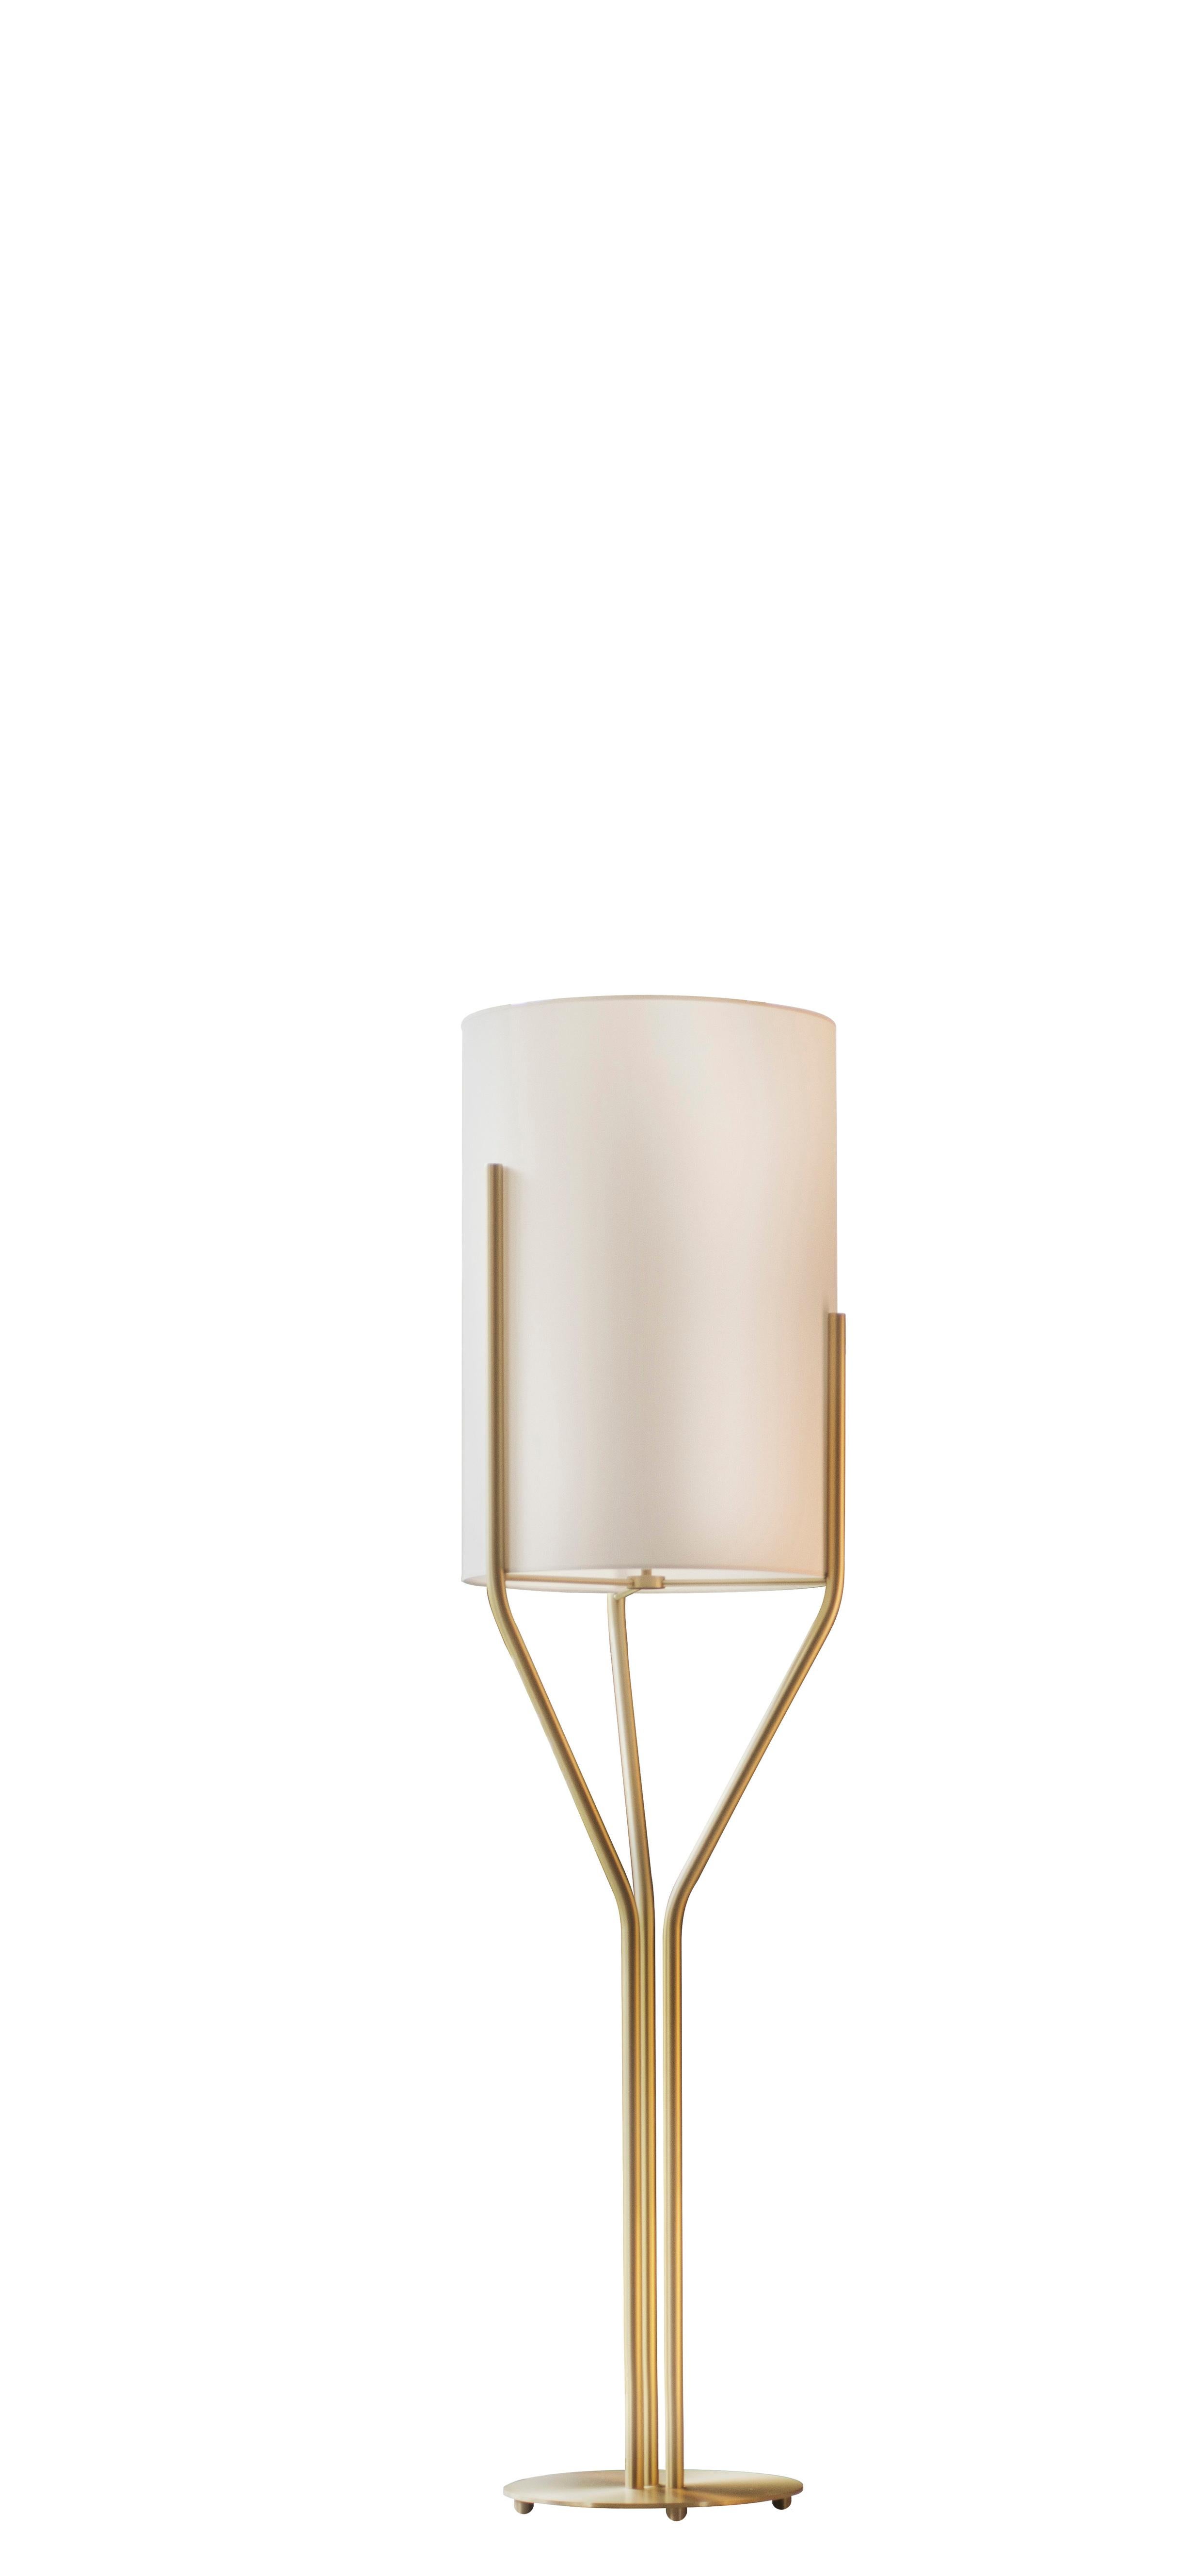 Arborescence XS Satin brass floor lamp by Hervé Langlais
Dimensions: D33 X H125 cm
Materials: Solid Brass, Lampshade Drop Paper® M1, Black textile cable (2m).
Others finishes and dimensions are available.

All our lamps can be wired according